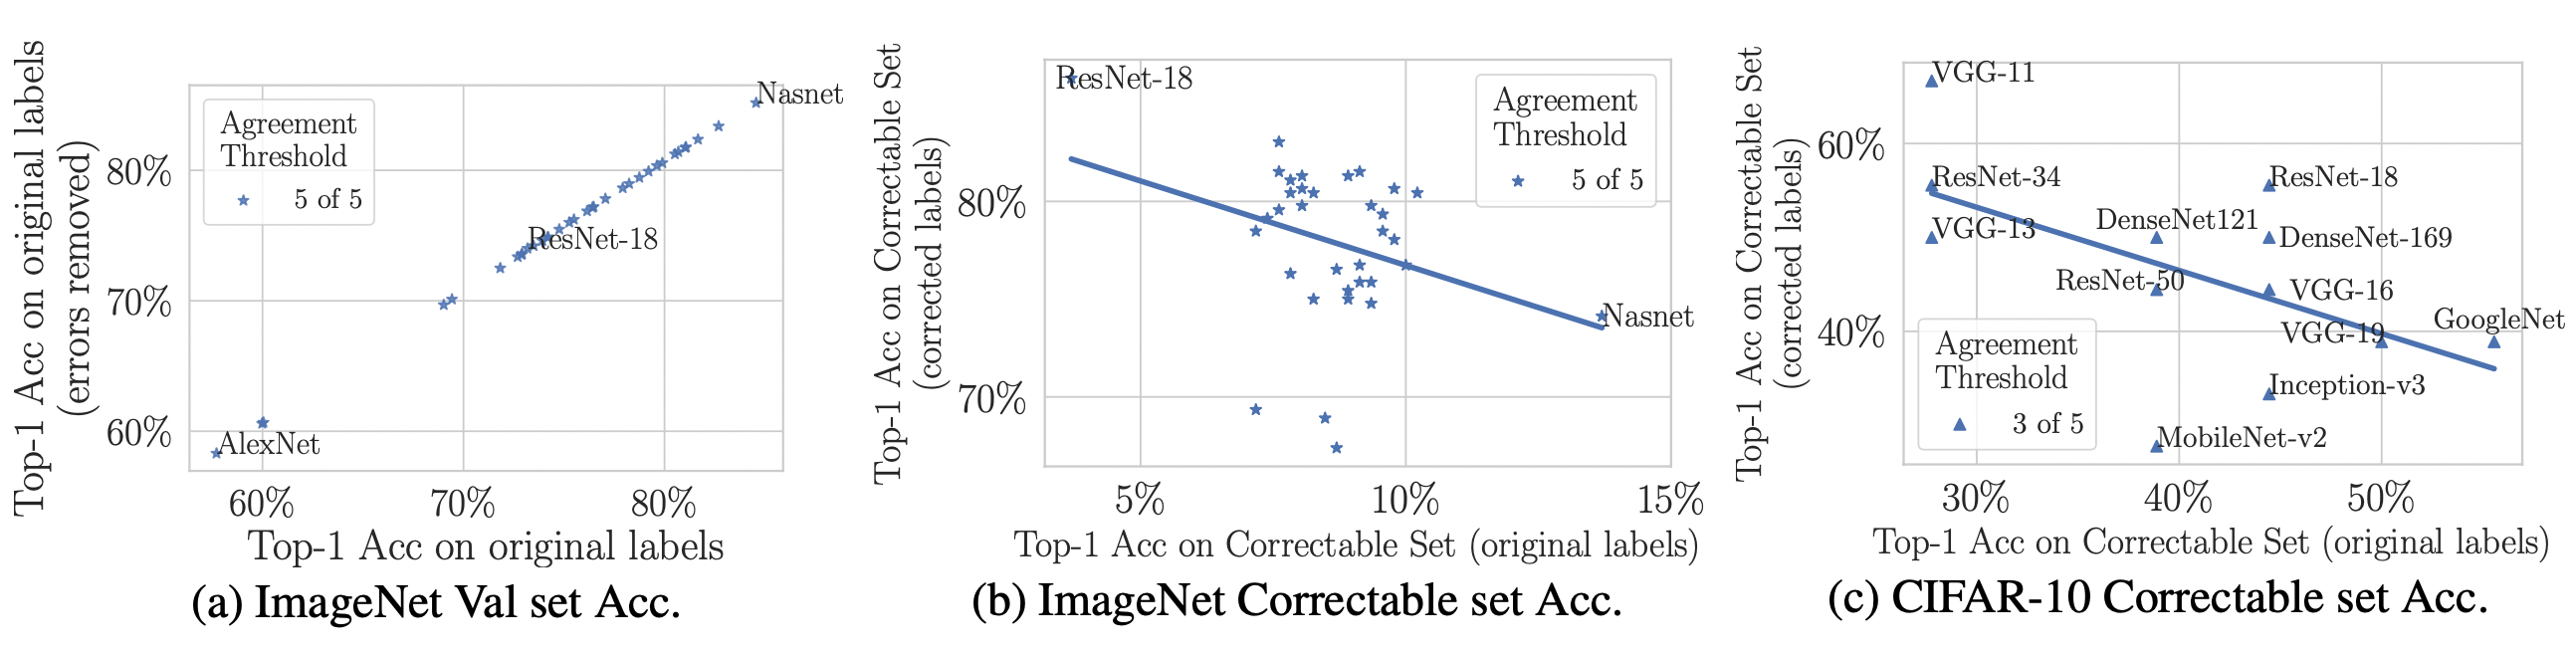 Benchmark rankings of CIFAR and ImageNet on corrected test labels